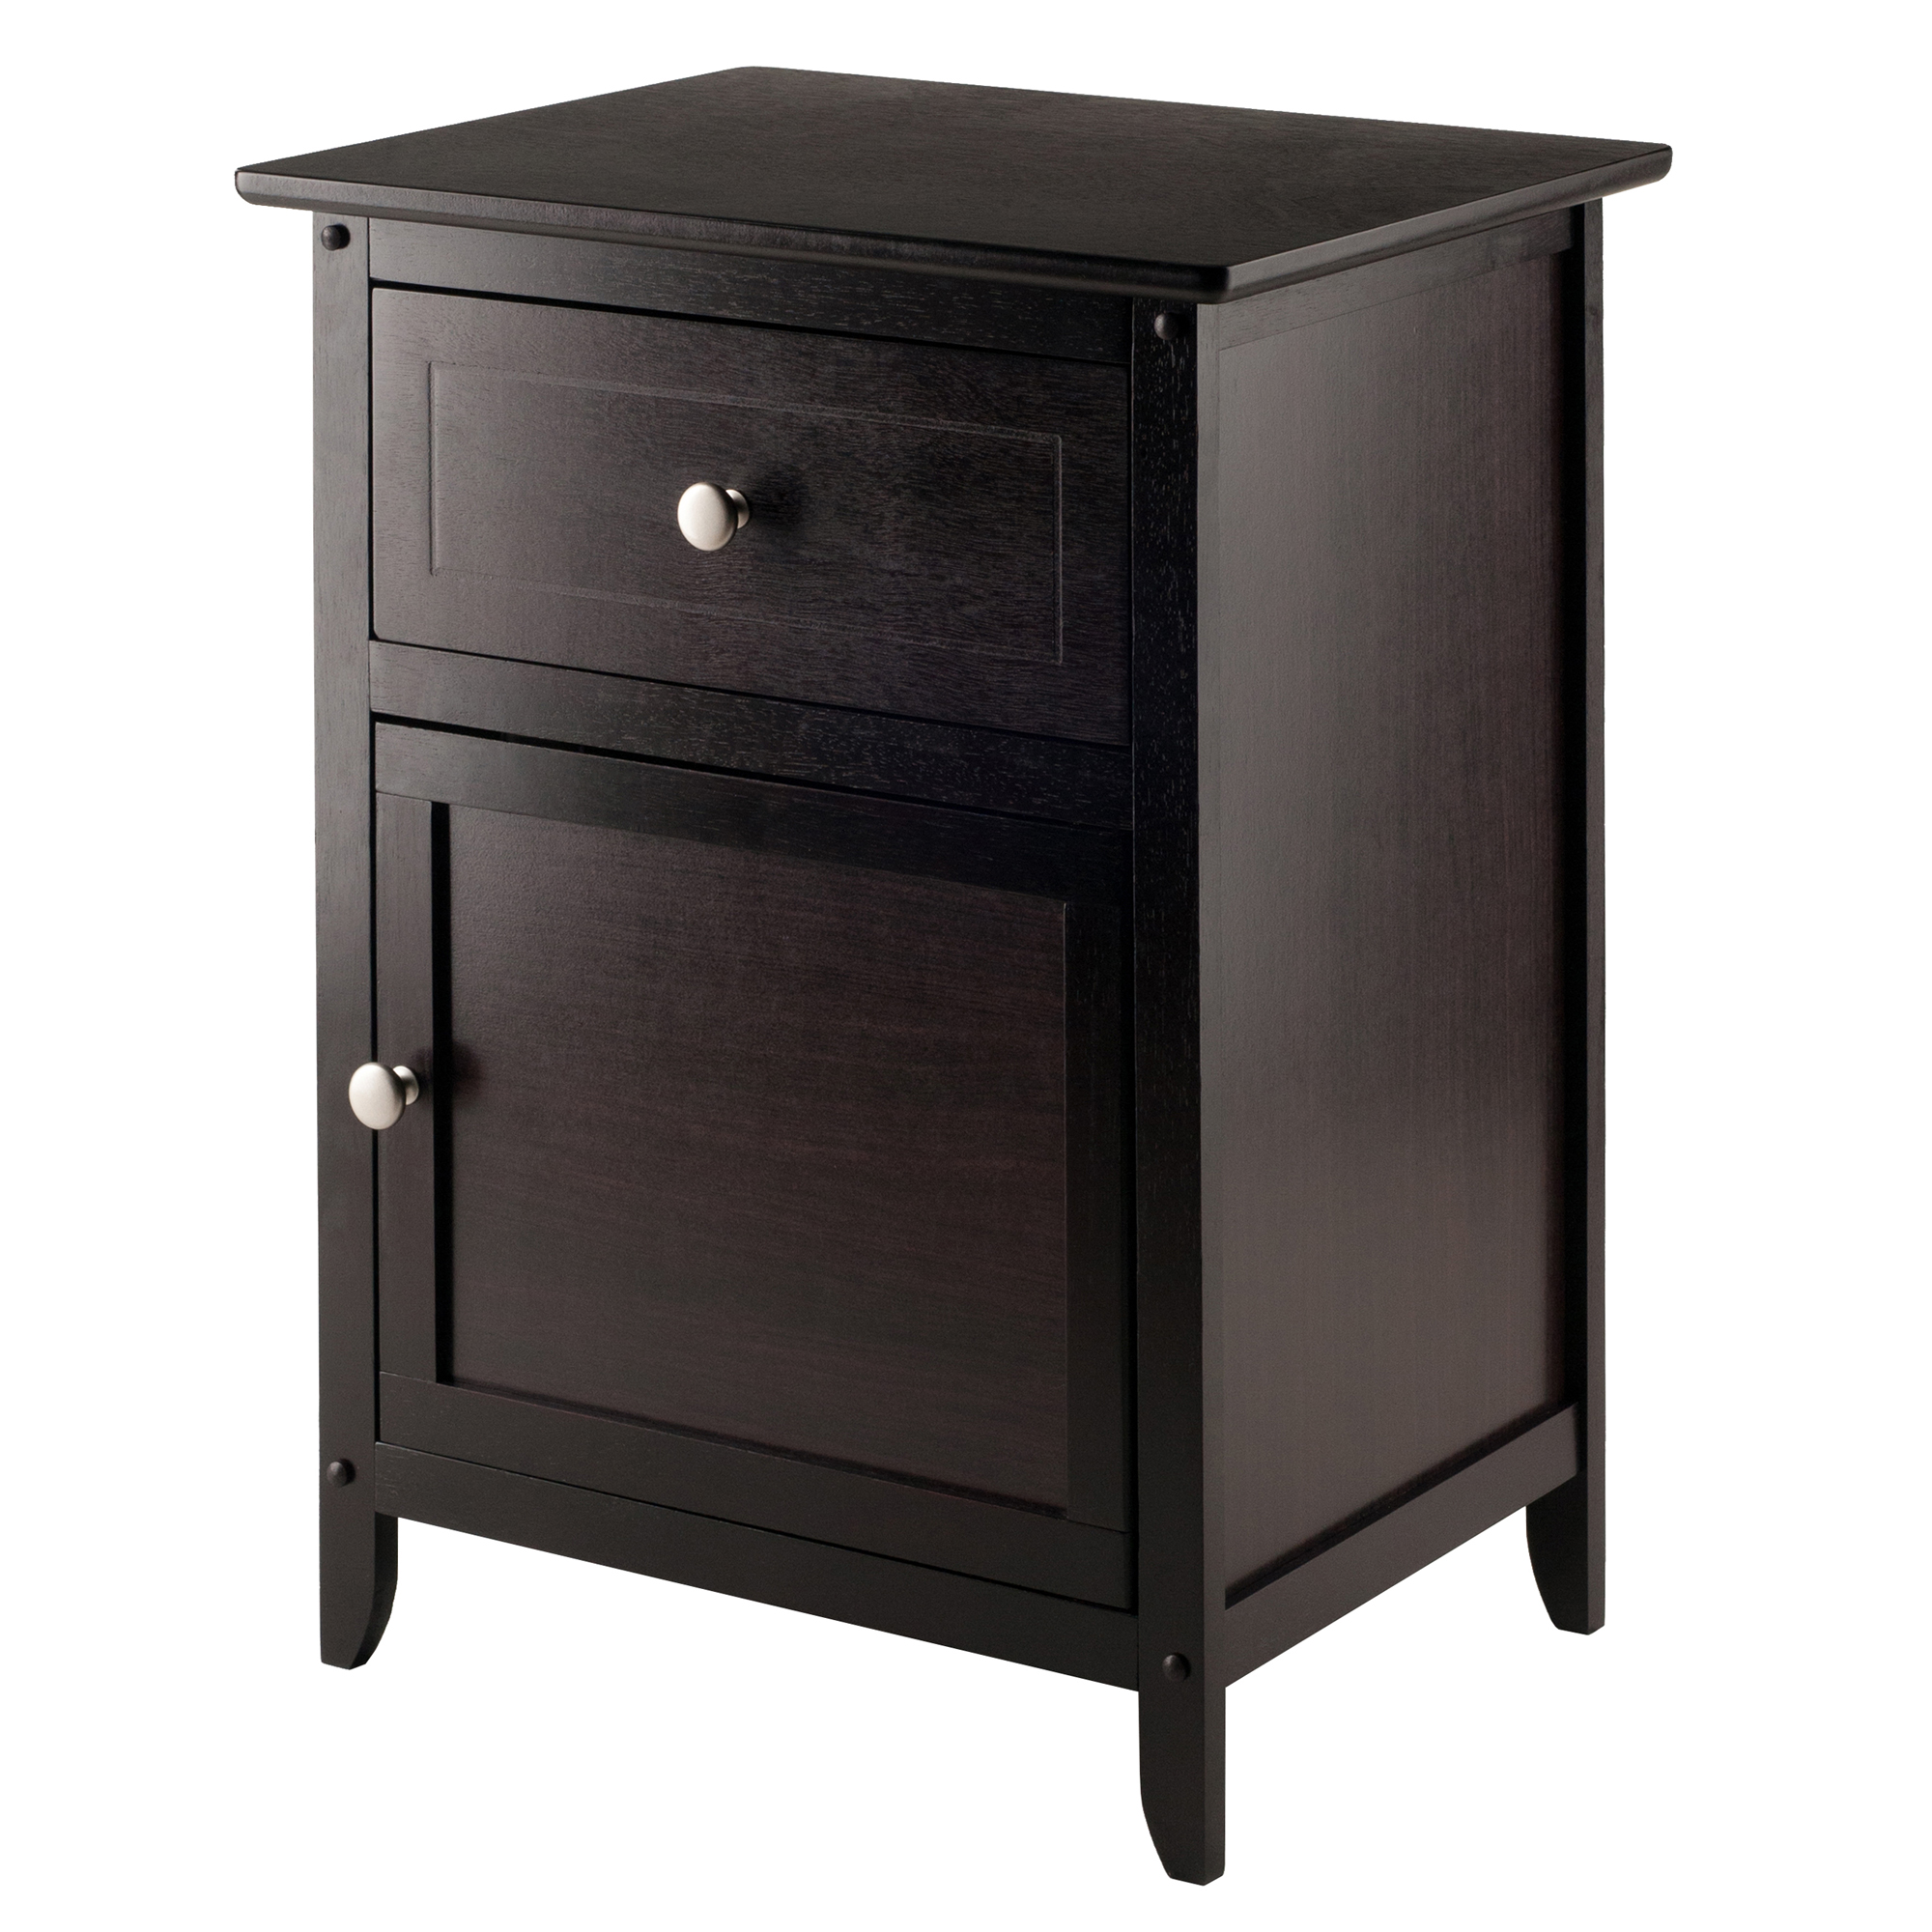 Winsome Wood Eugene Accent Table, Nightstand, Espresso Finish - image 1 of 9